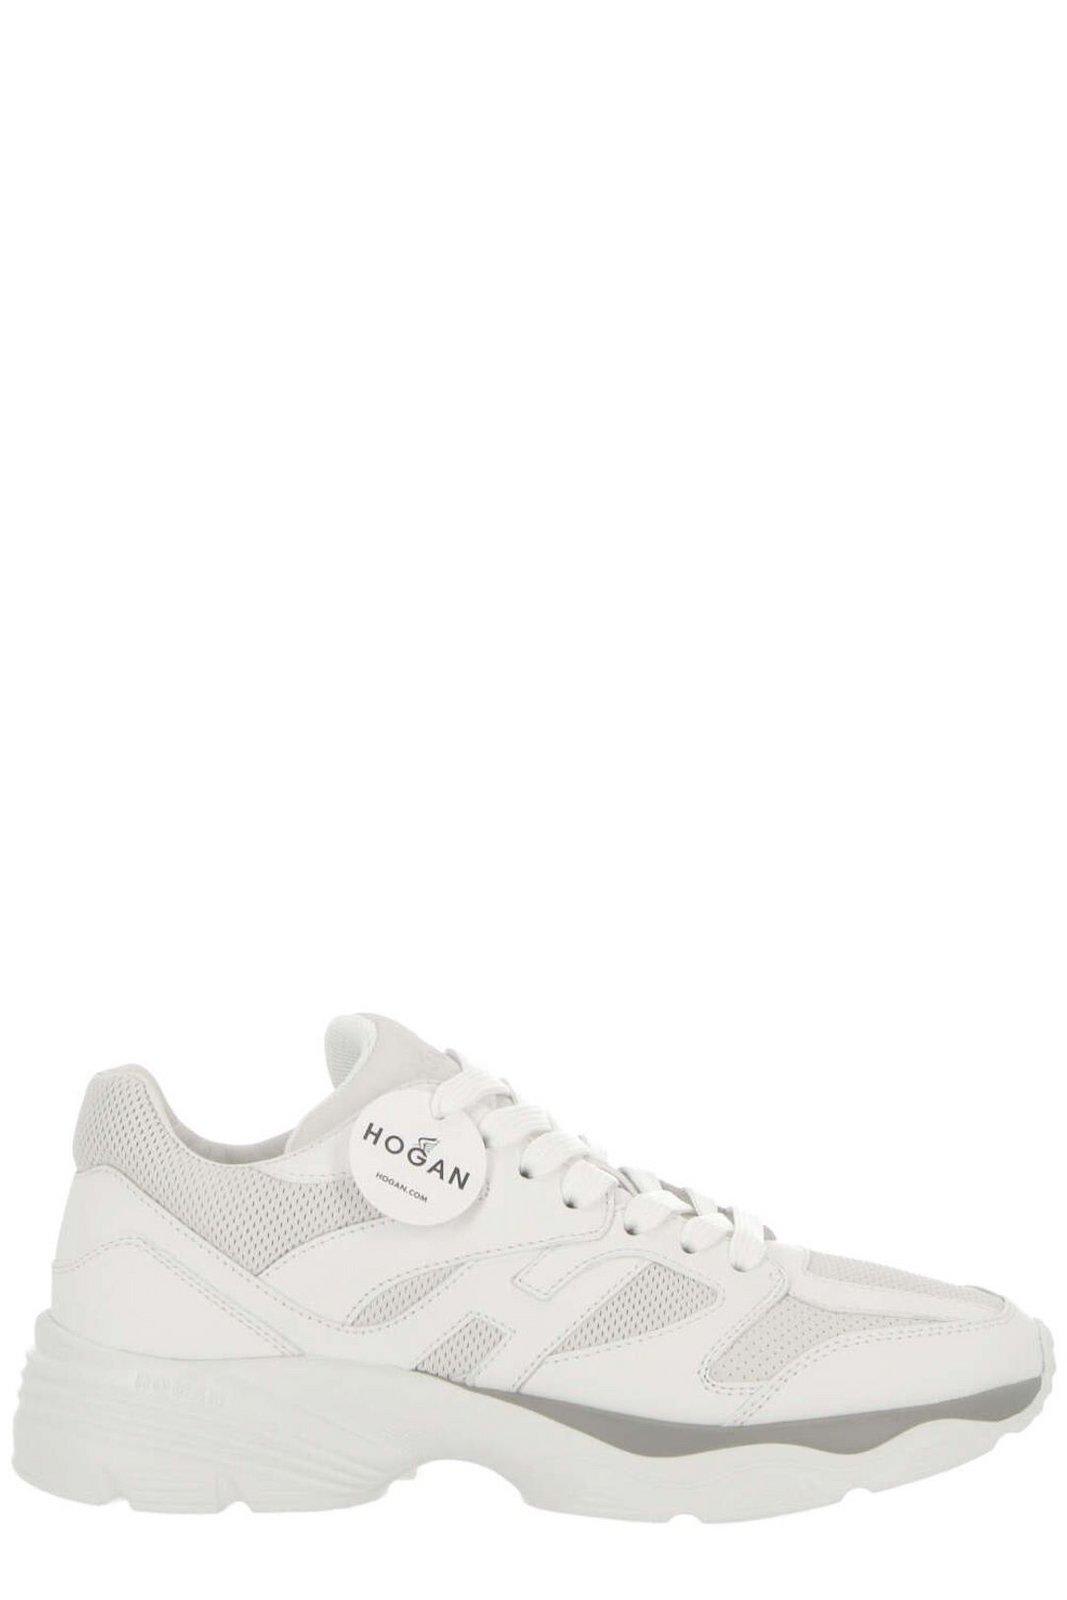 Shop Hogan Round Toe Lace-up Sneakers